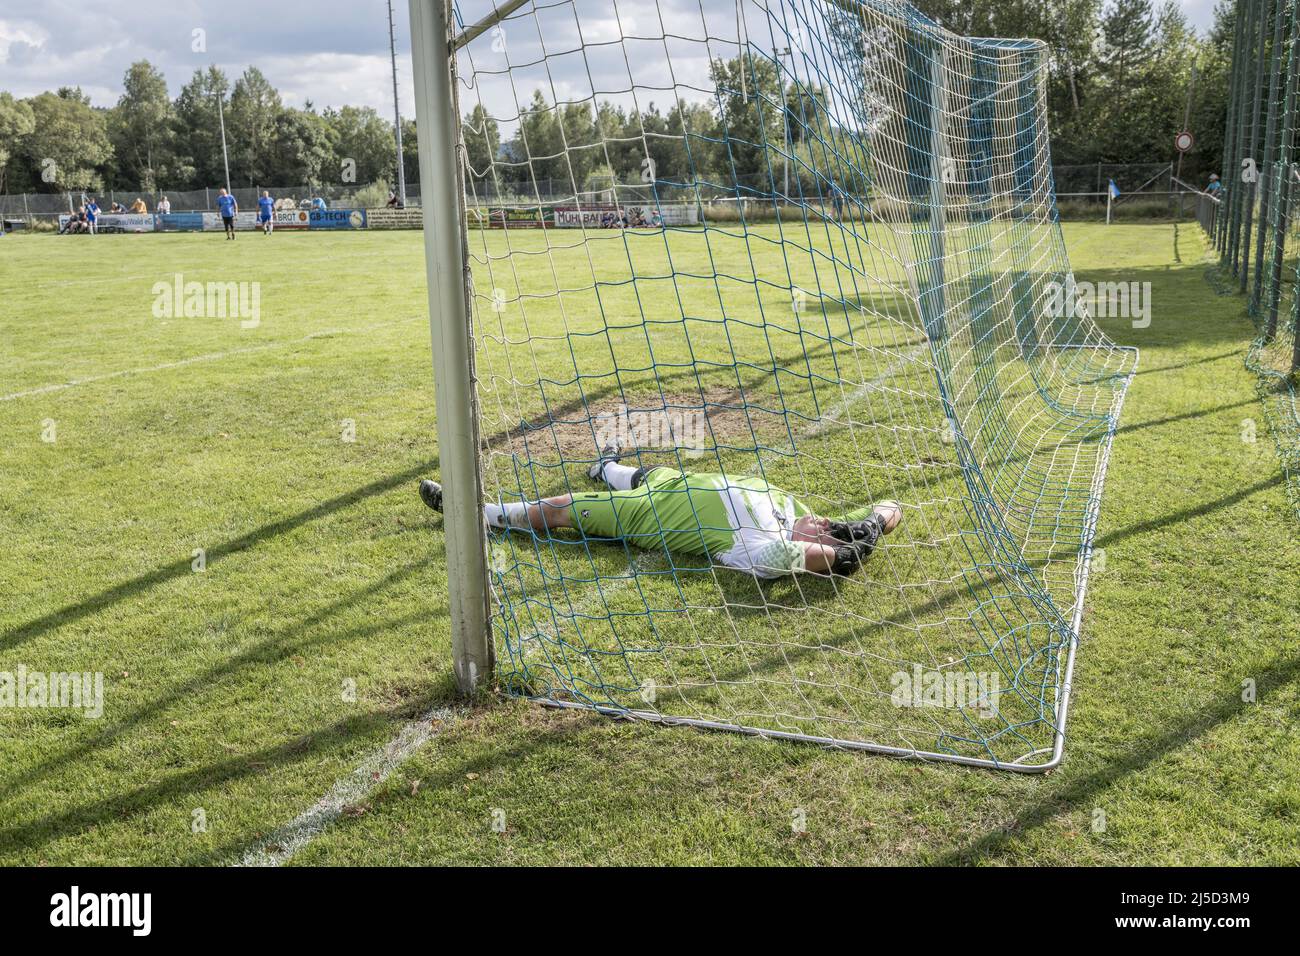 TSV Böbrach concedes a goal in the match against DJK Rattenberg. In the end it is 0:19, amateur soccer, worst soccer club in Bavaria [automated translation] Stock Photo